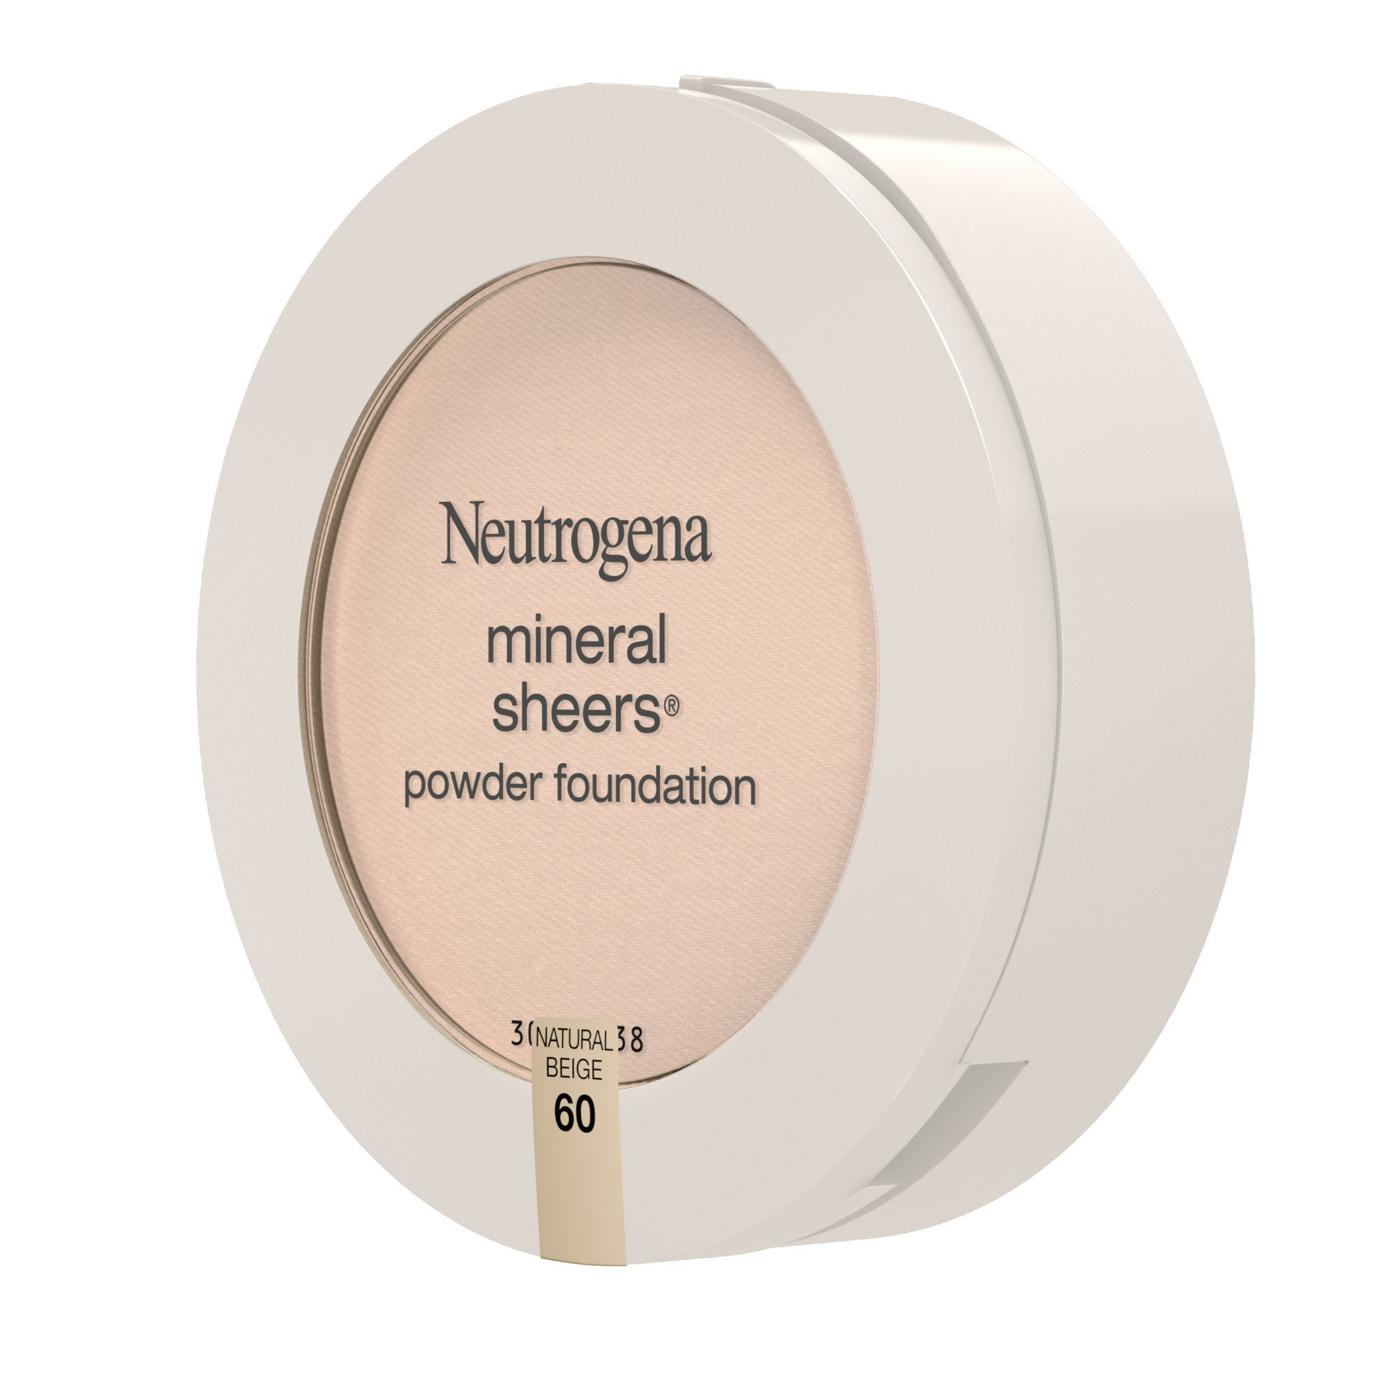 Neutrogena Mineral Sheers 60 Natural Beige Compact Powder Foundation; image 6 of 6